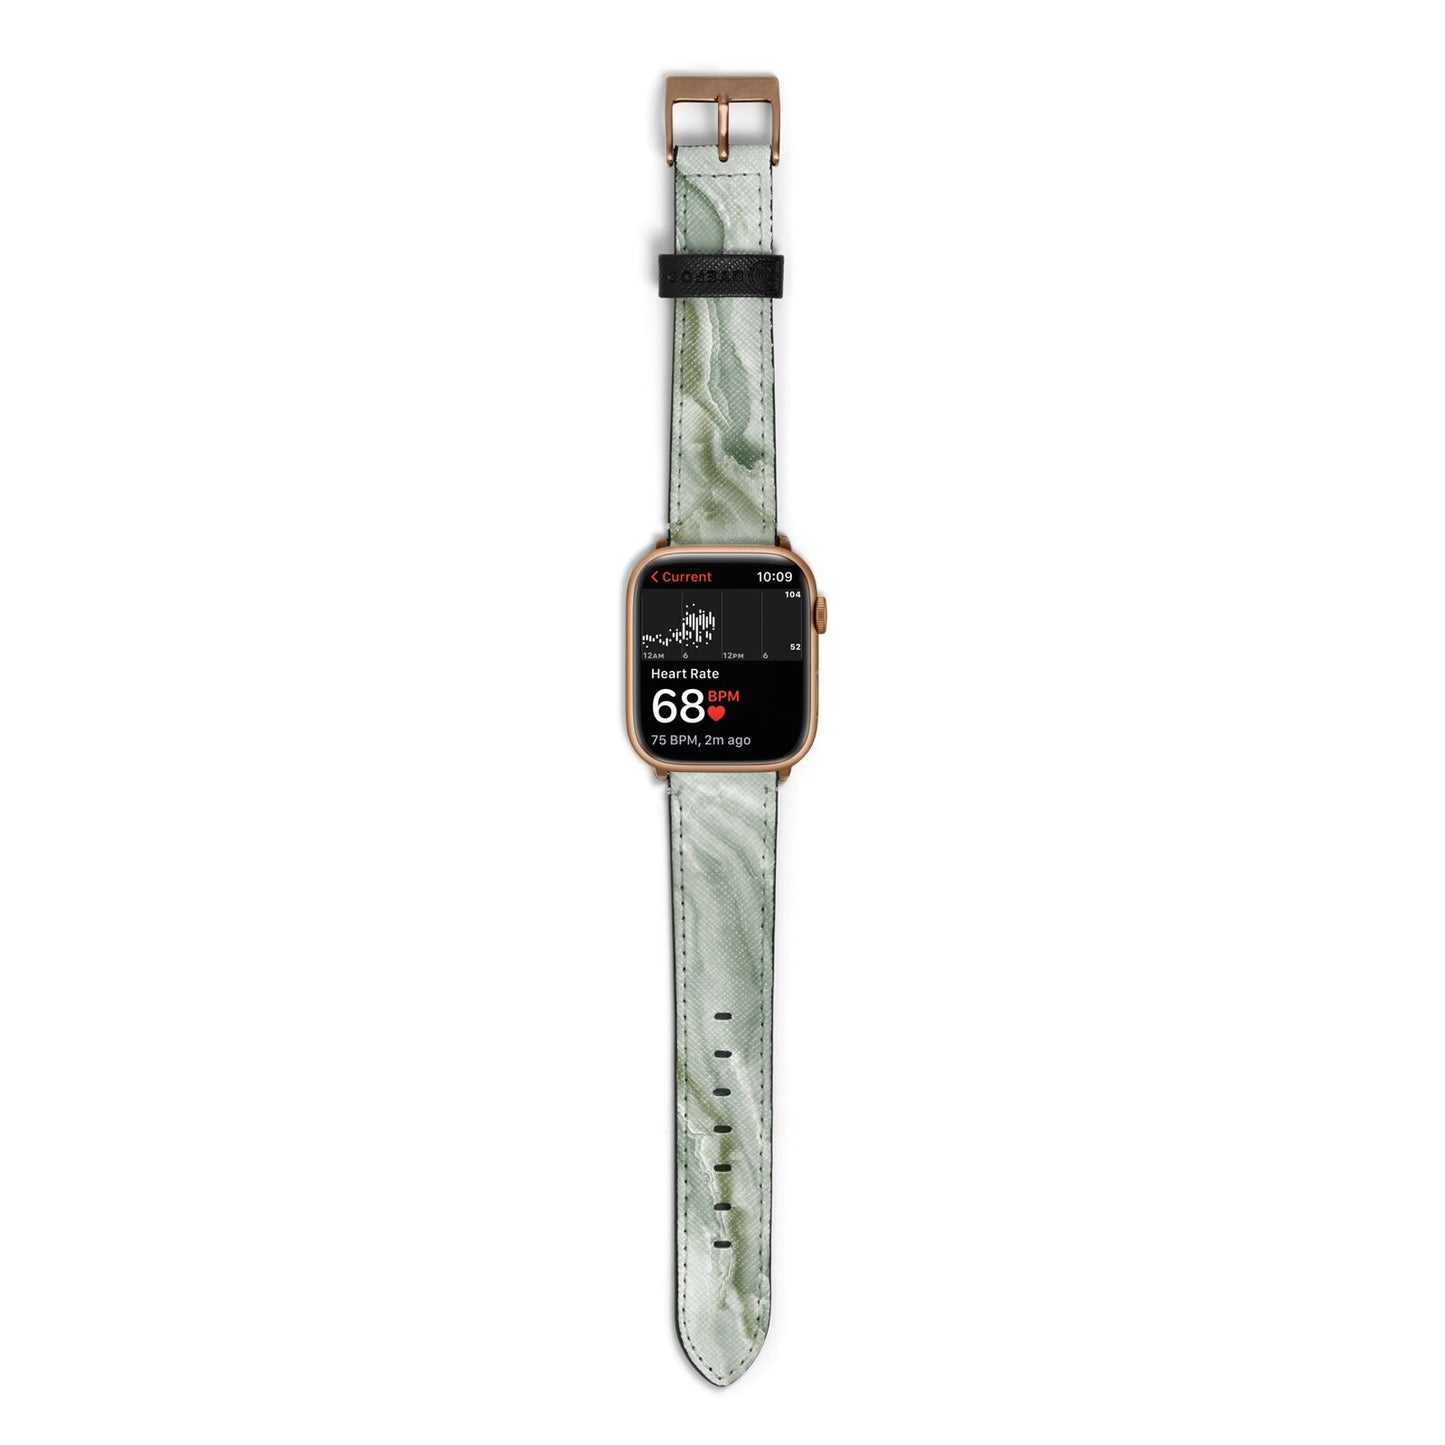 Pistachio Green Marble Apple Watch Strap Size 38mm with Gold Hardware